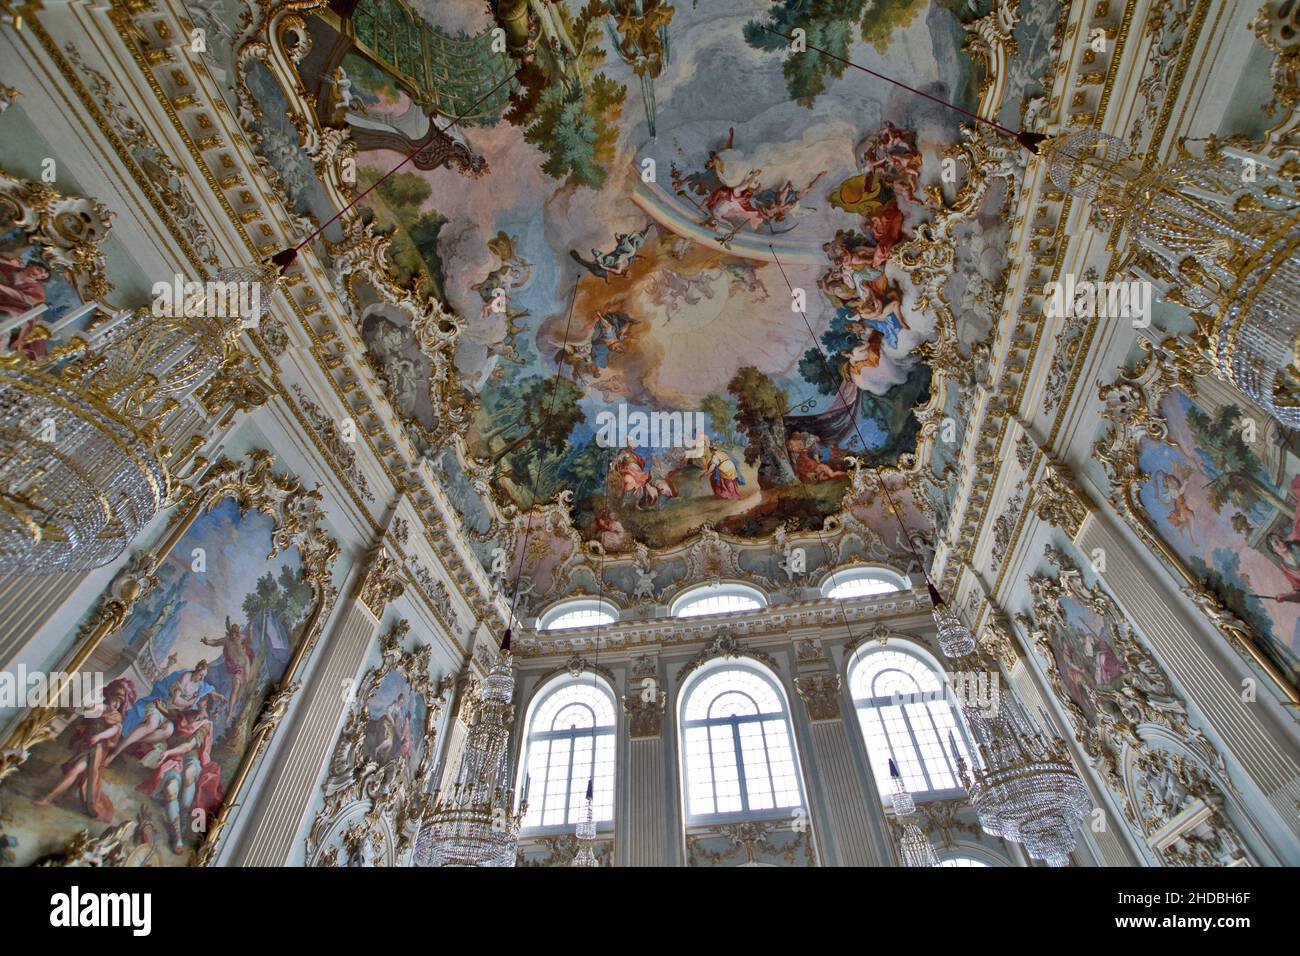 Munich, Germany: elaborately painted ceiling of the festival hall (Nymphenburg Palace). Stock Photo